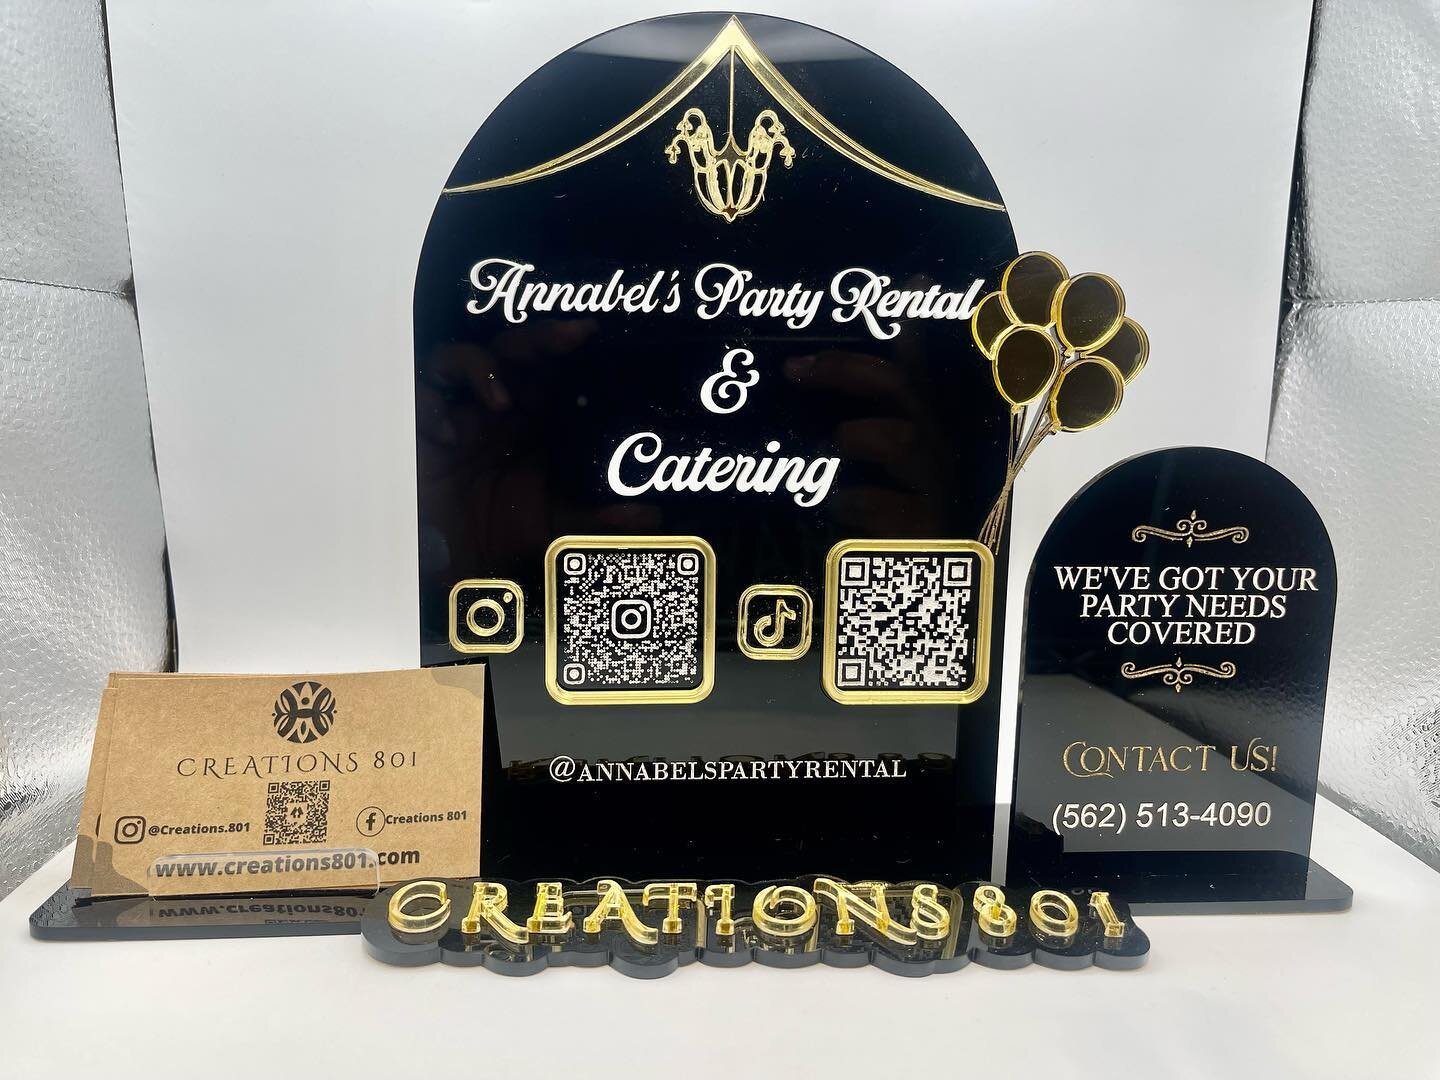 This sign is beautiful and elegant! You can never go wrong with black and gold 🖤✨ Contact @annabelspartyrental all your party needs. They Cater too!! #customqrsign #qrcodes #partysupply #catering #creations801 #handmadewithlove